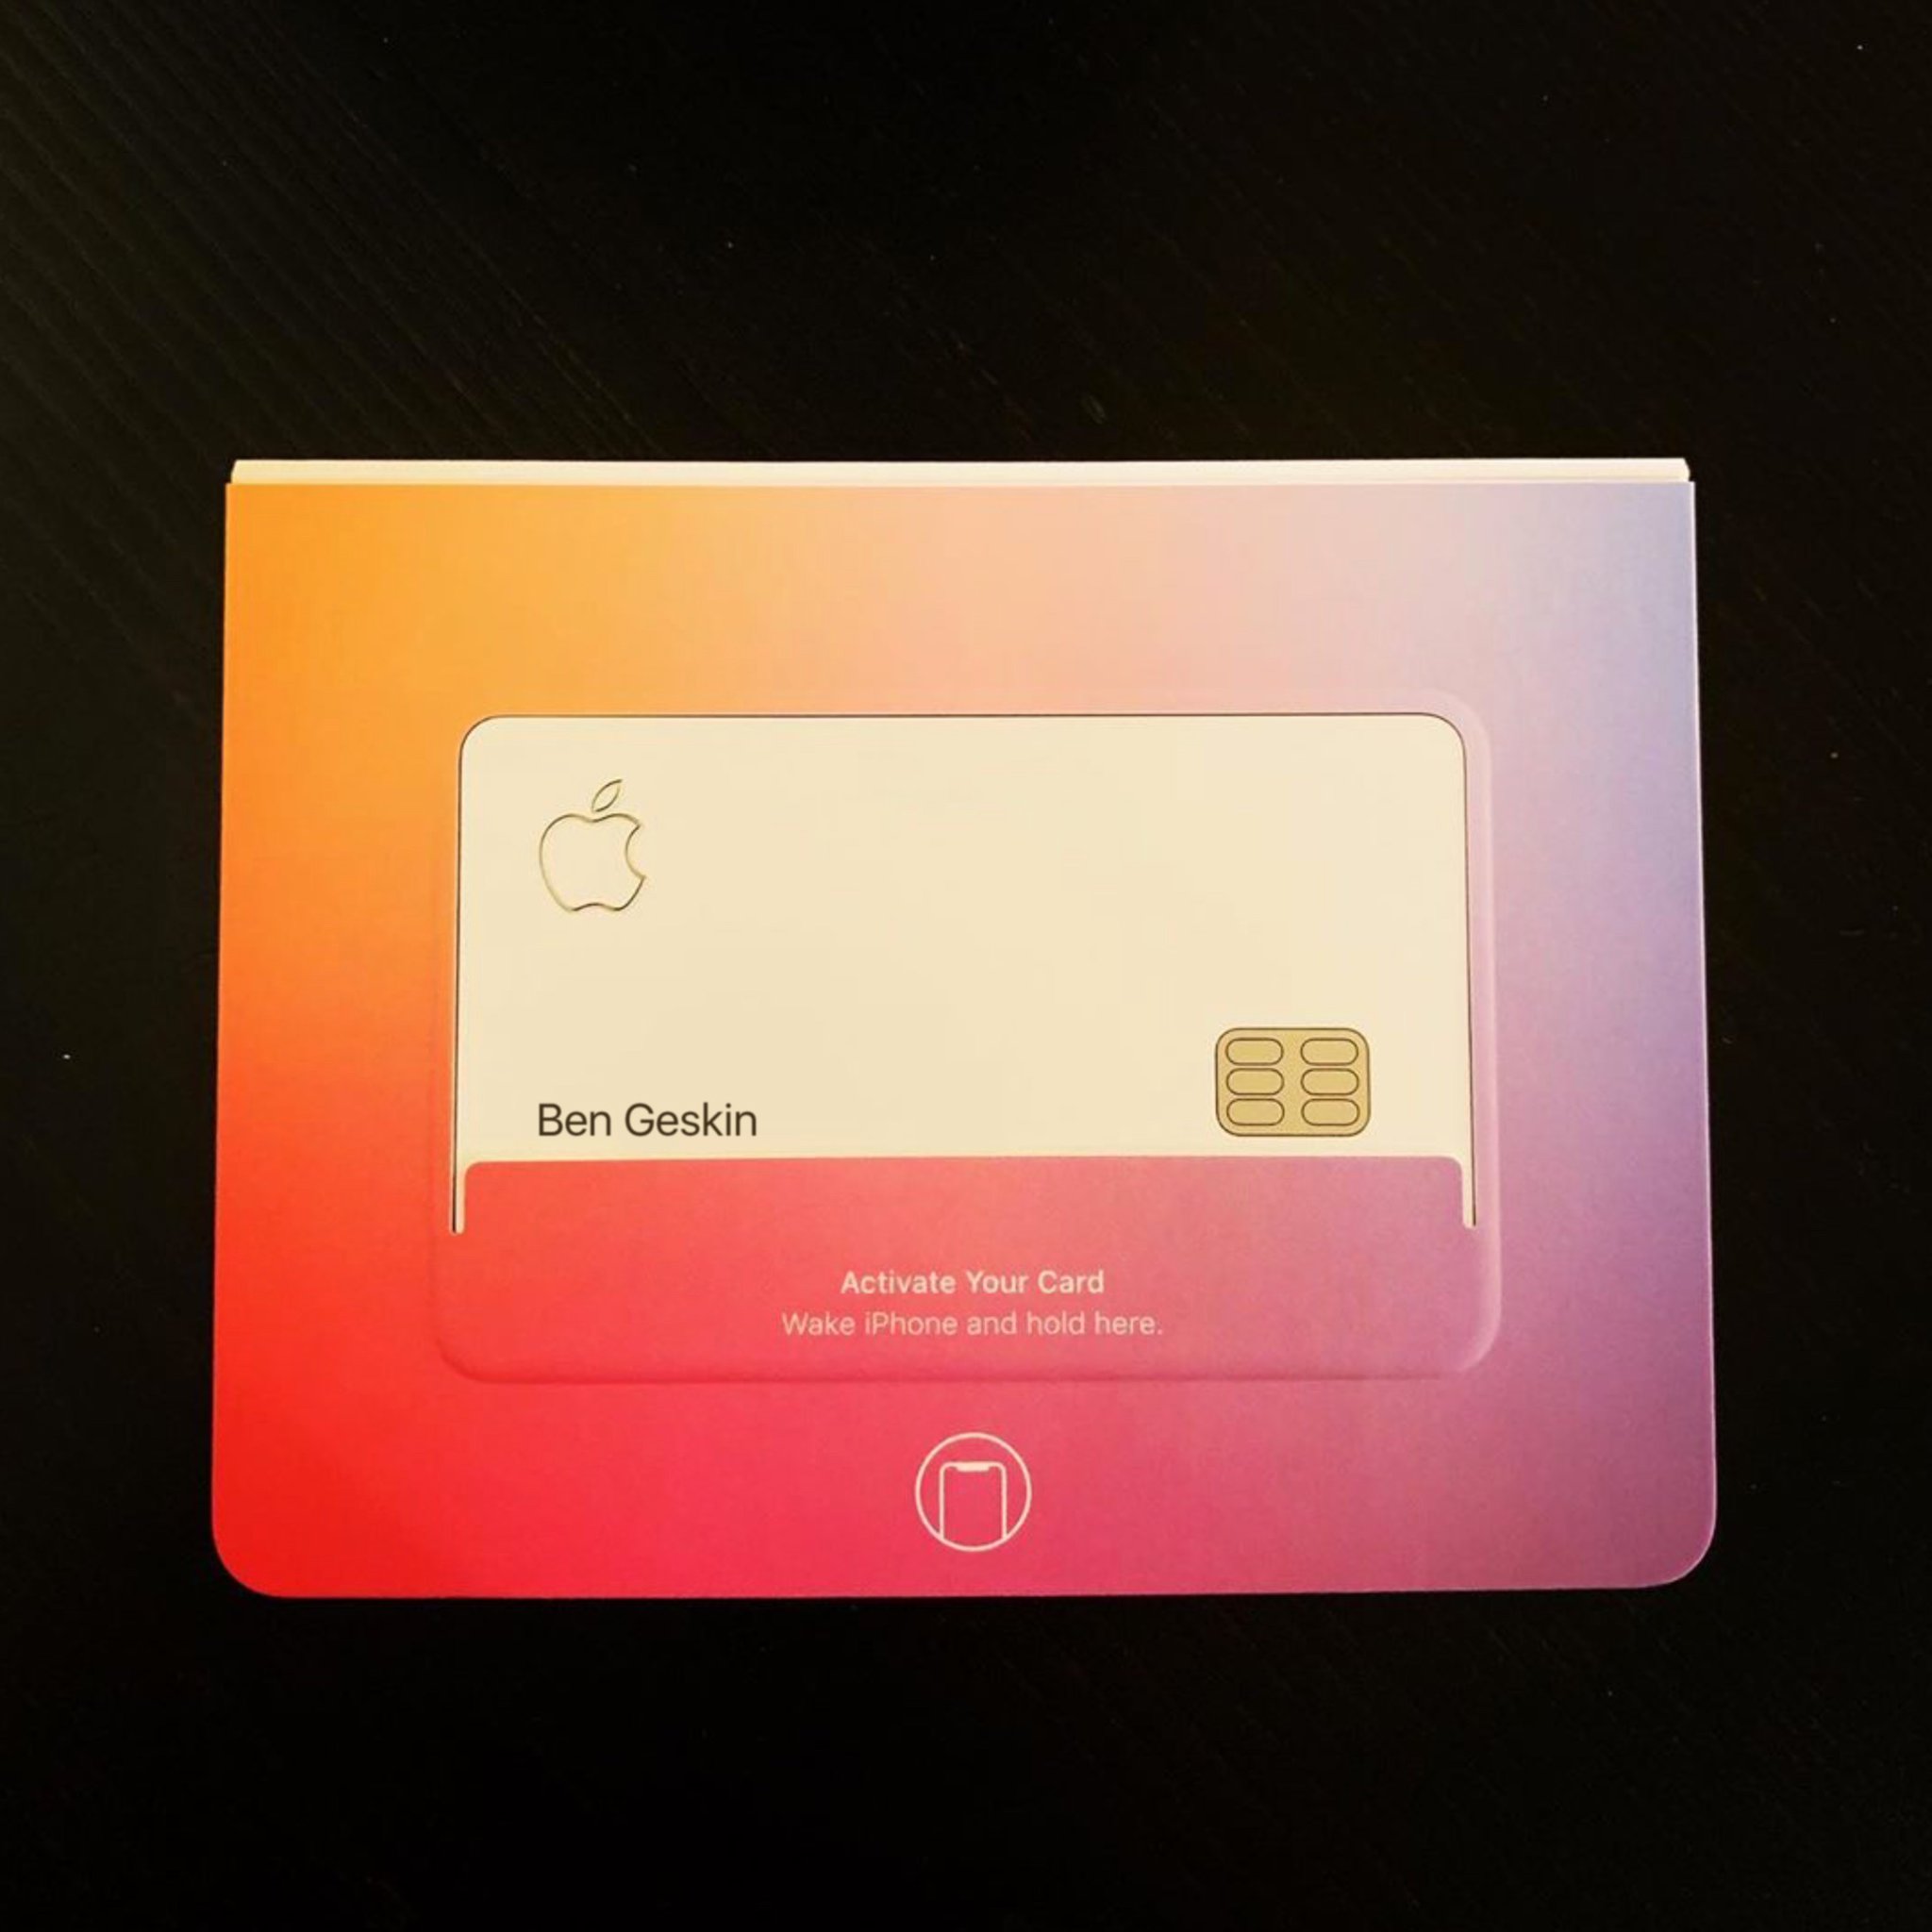 Photos show Apple Card packaging ahead of summer launch